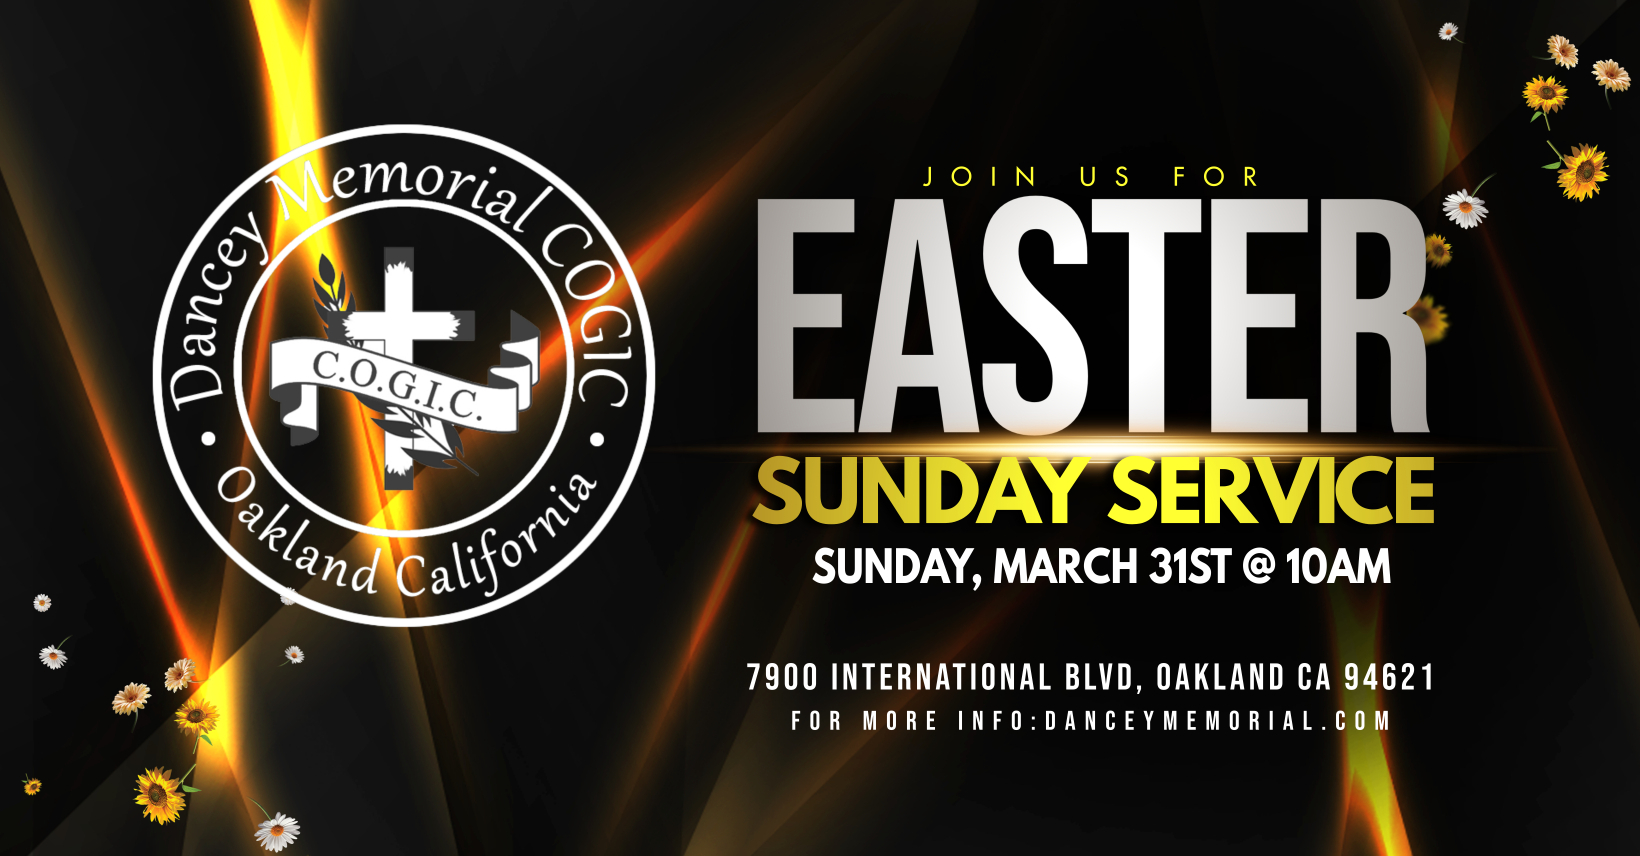 COGIC - Easter Sunday Service - March 31st @ 10am